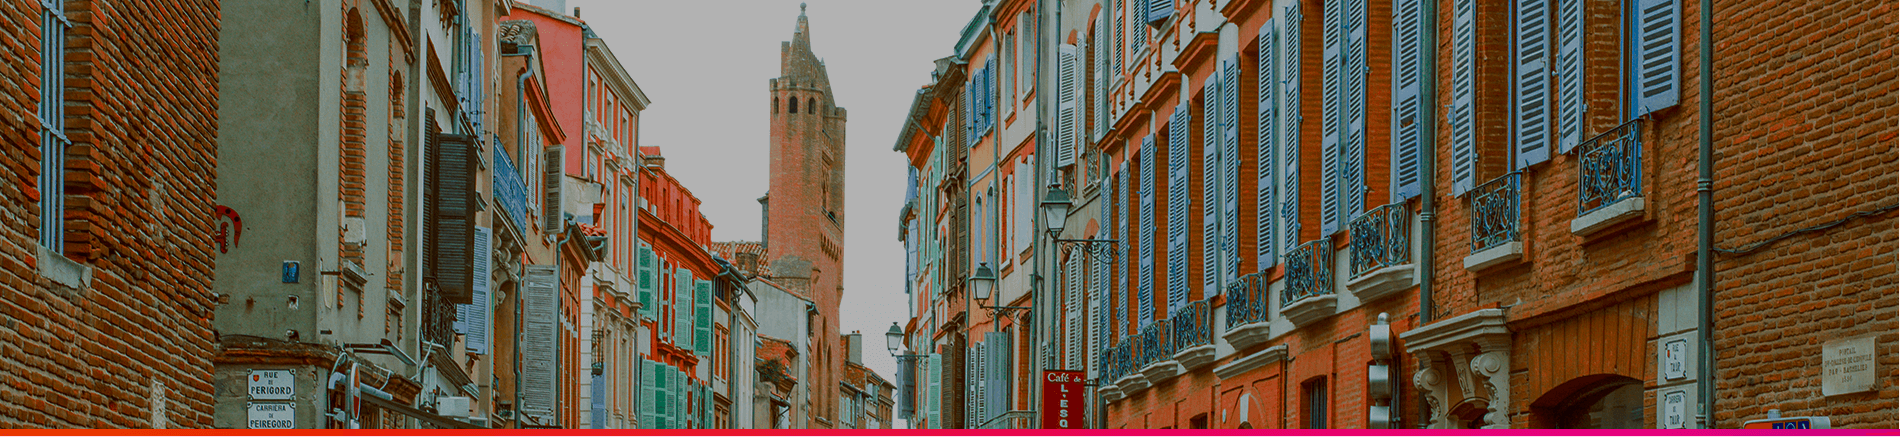 Toulouse Welcome - Slider City Tour Toulouse